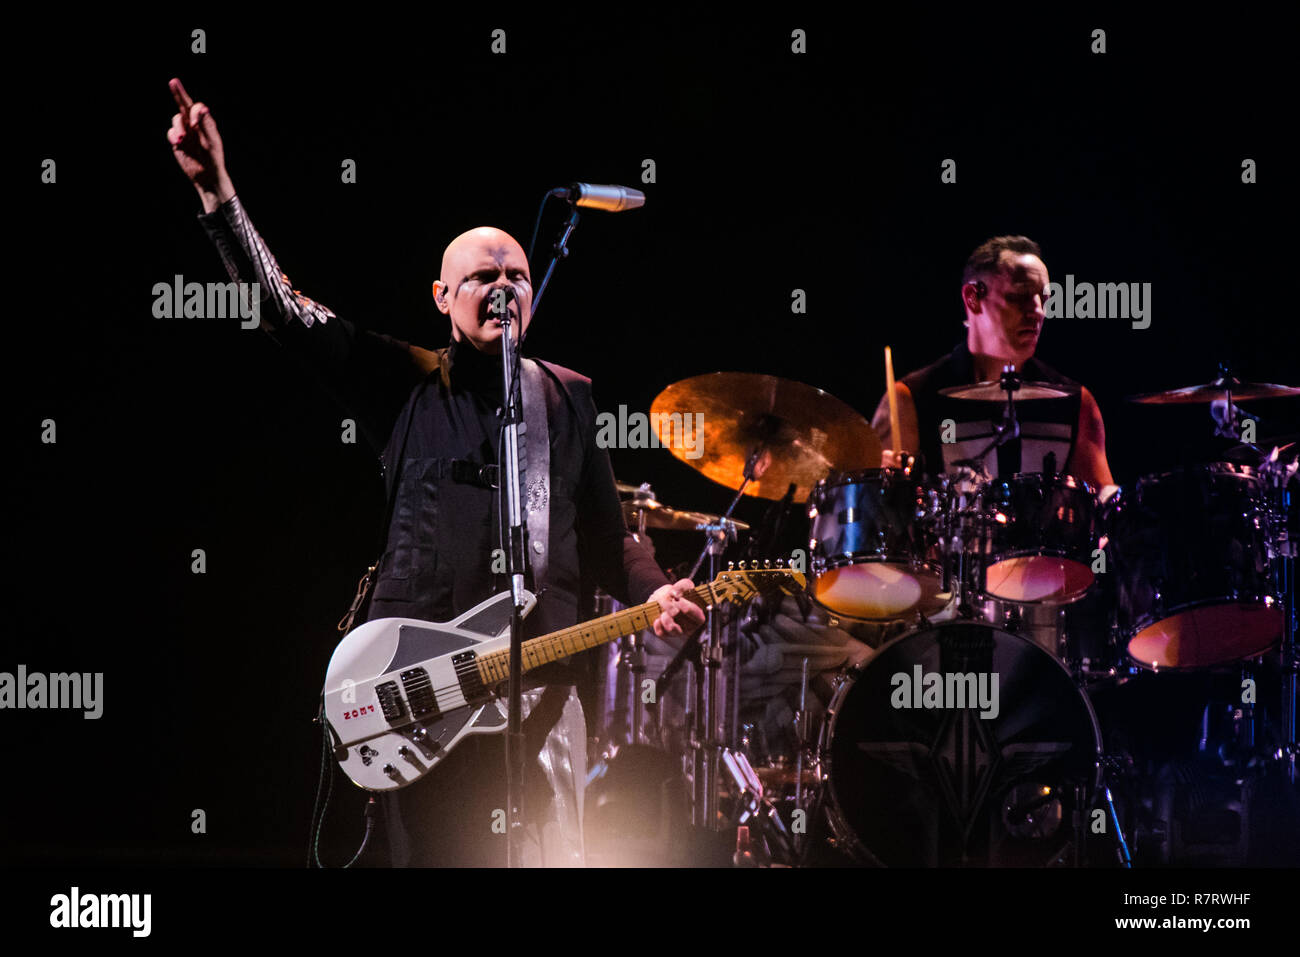 Billy Corgan and Jimmy Chamberlin of the American rock band The Smashing Pumpkins performing live on stage in Bologna for their reunion tour 2018 Stock Photo